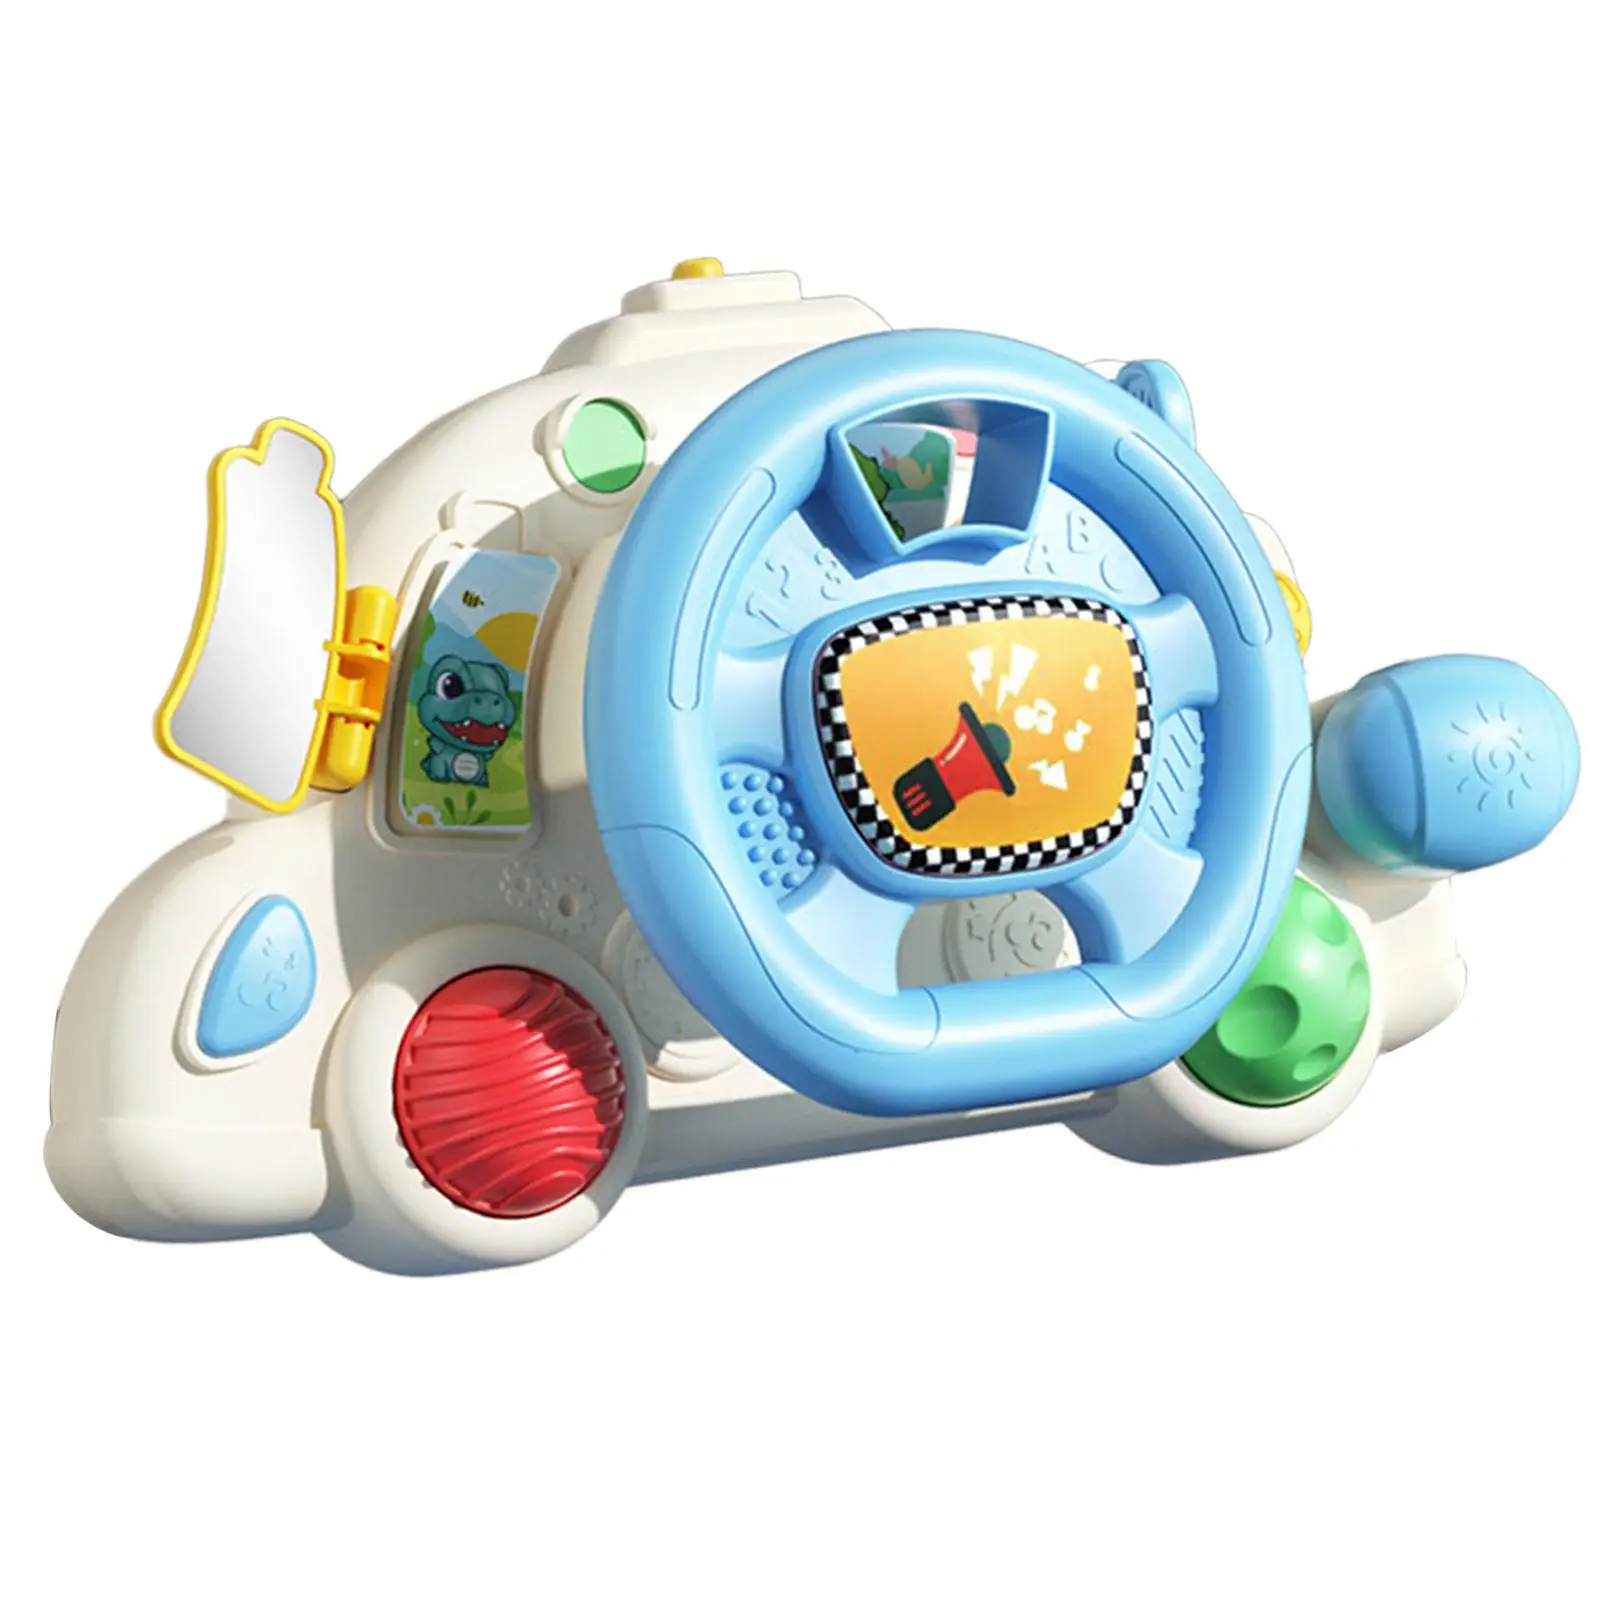 Simulation Steering Wheel Entertainment Fun Learning High Simulation Toy Steering Wheel for Preschool Boys and Girls Kids Gifts